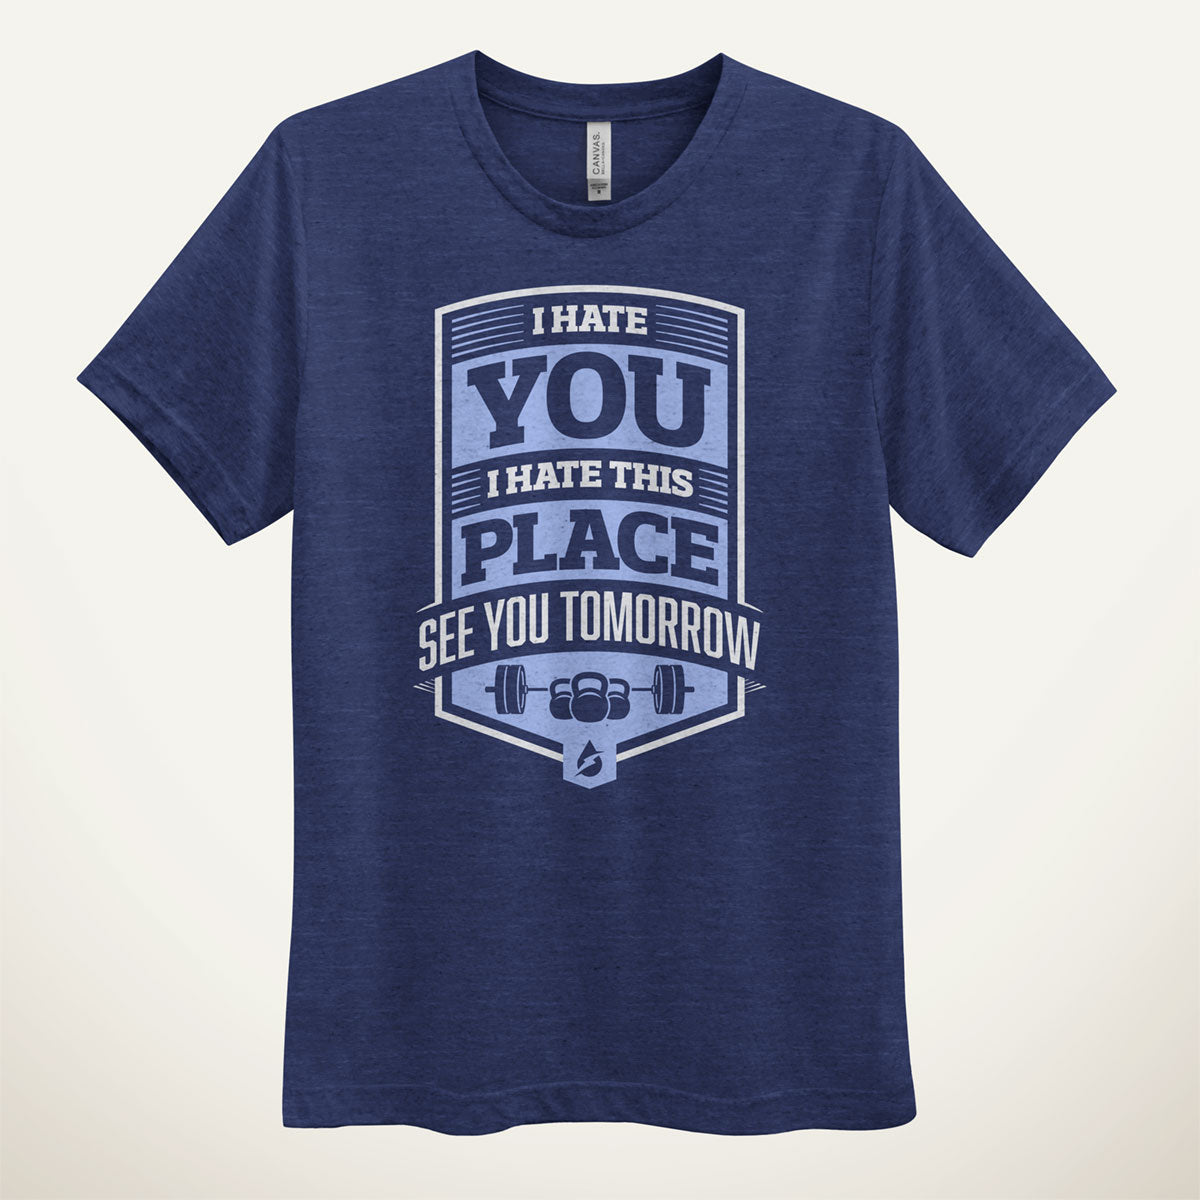 I Hate You I Hate This Place See You Tomorrow Men's T-Shirt